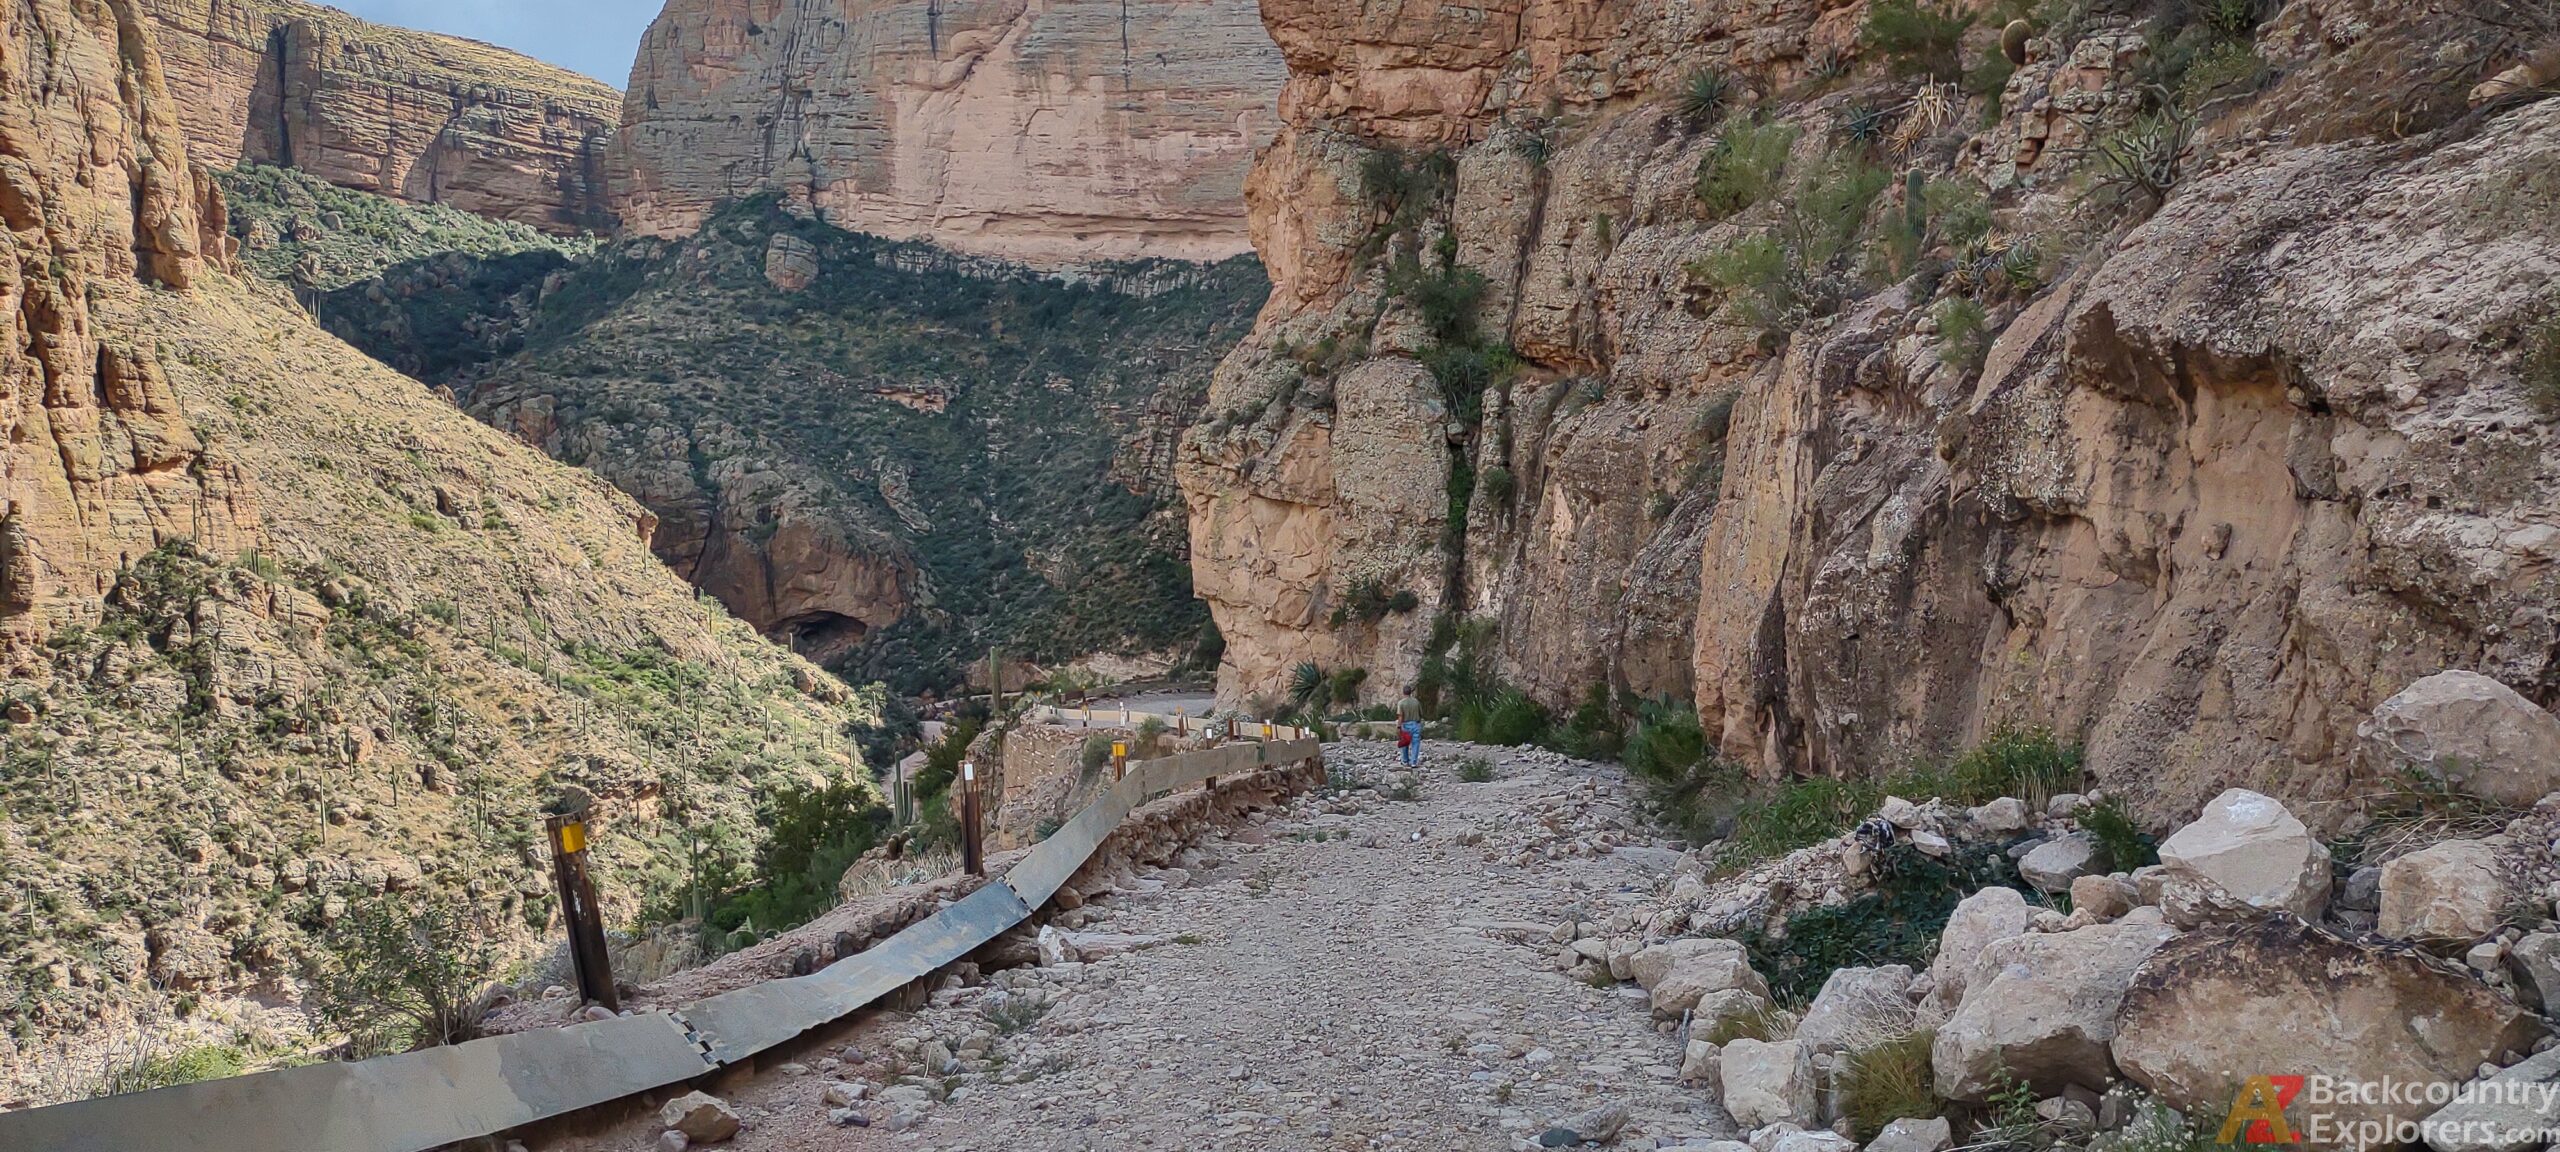 ADOT starts studies to repair Fish Creek Hill on the world famous Apache Trail